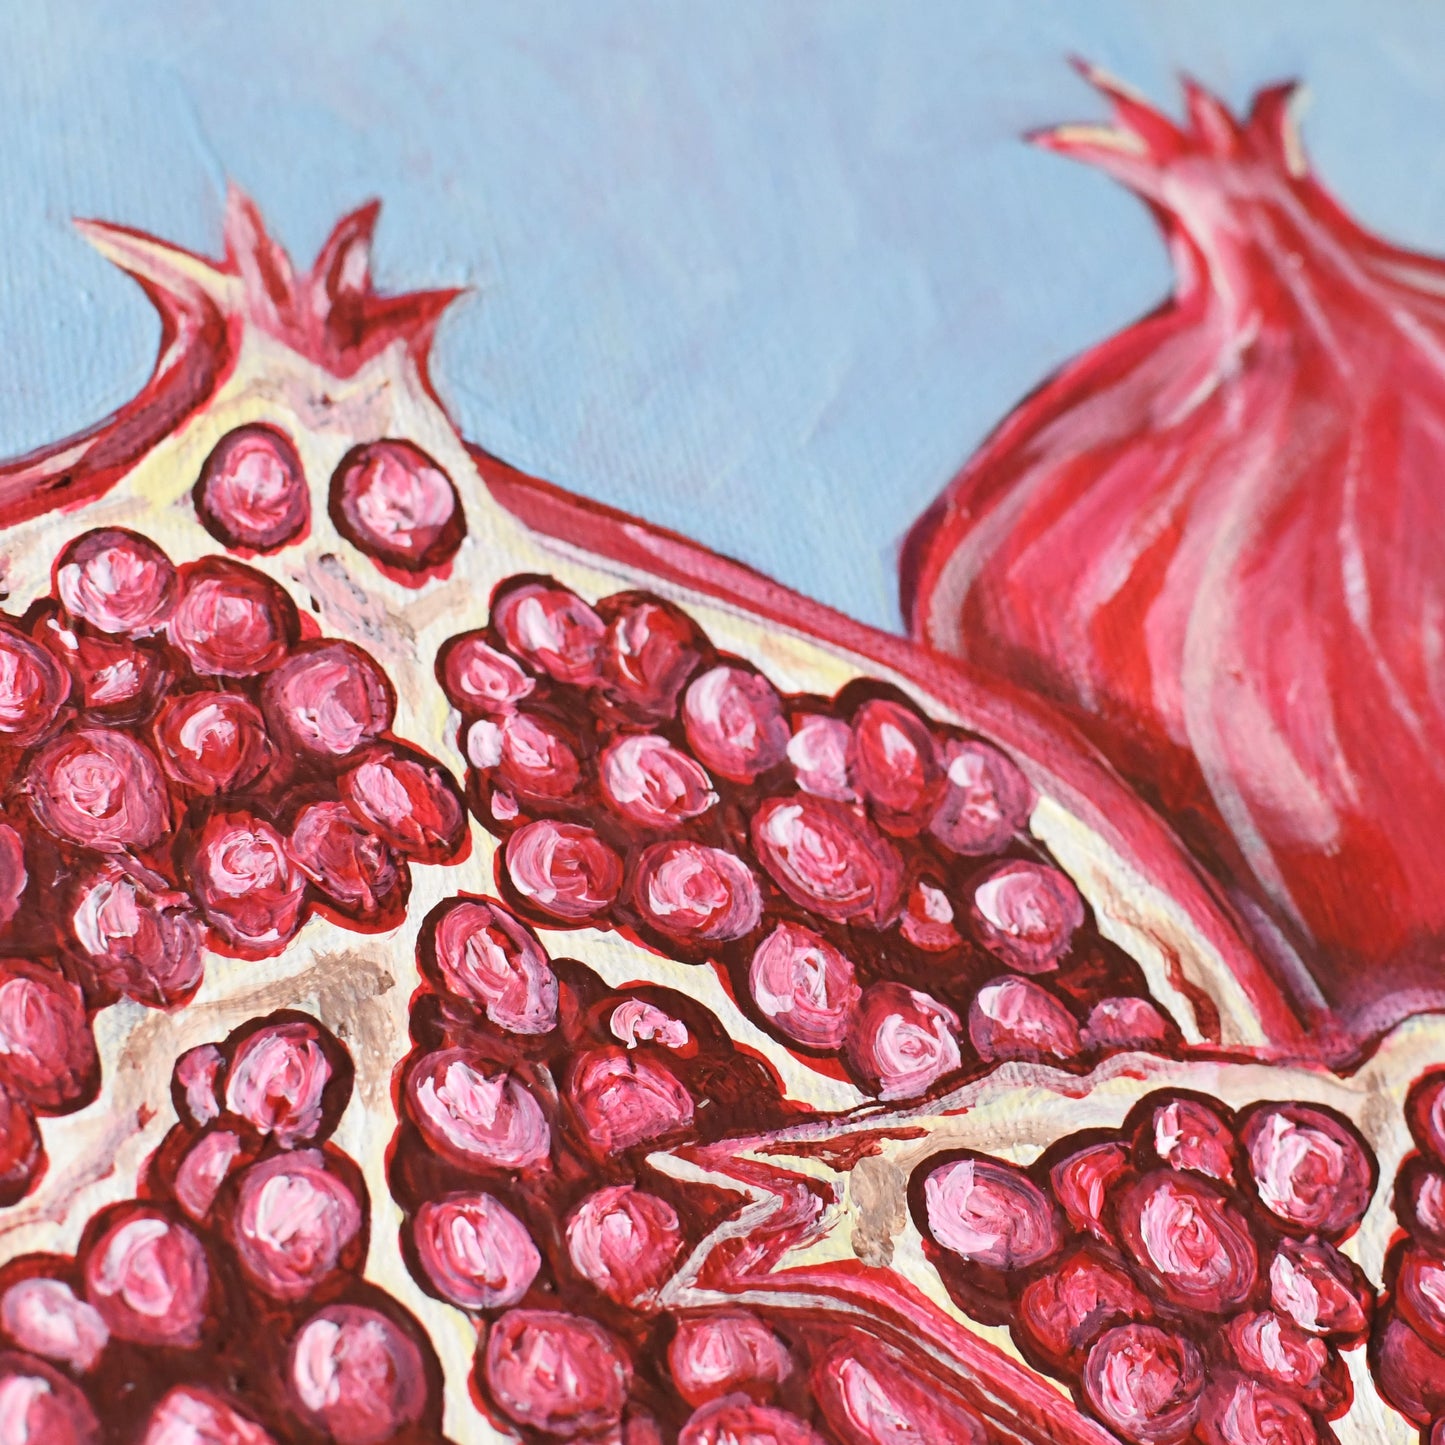 The Pomegranates | Limited Edition Prints